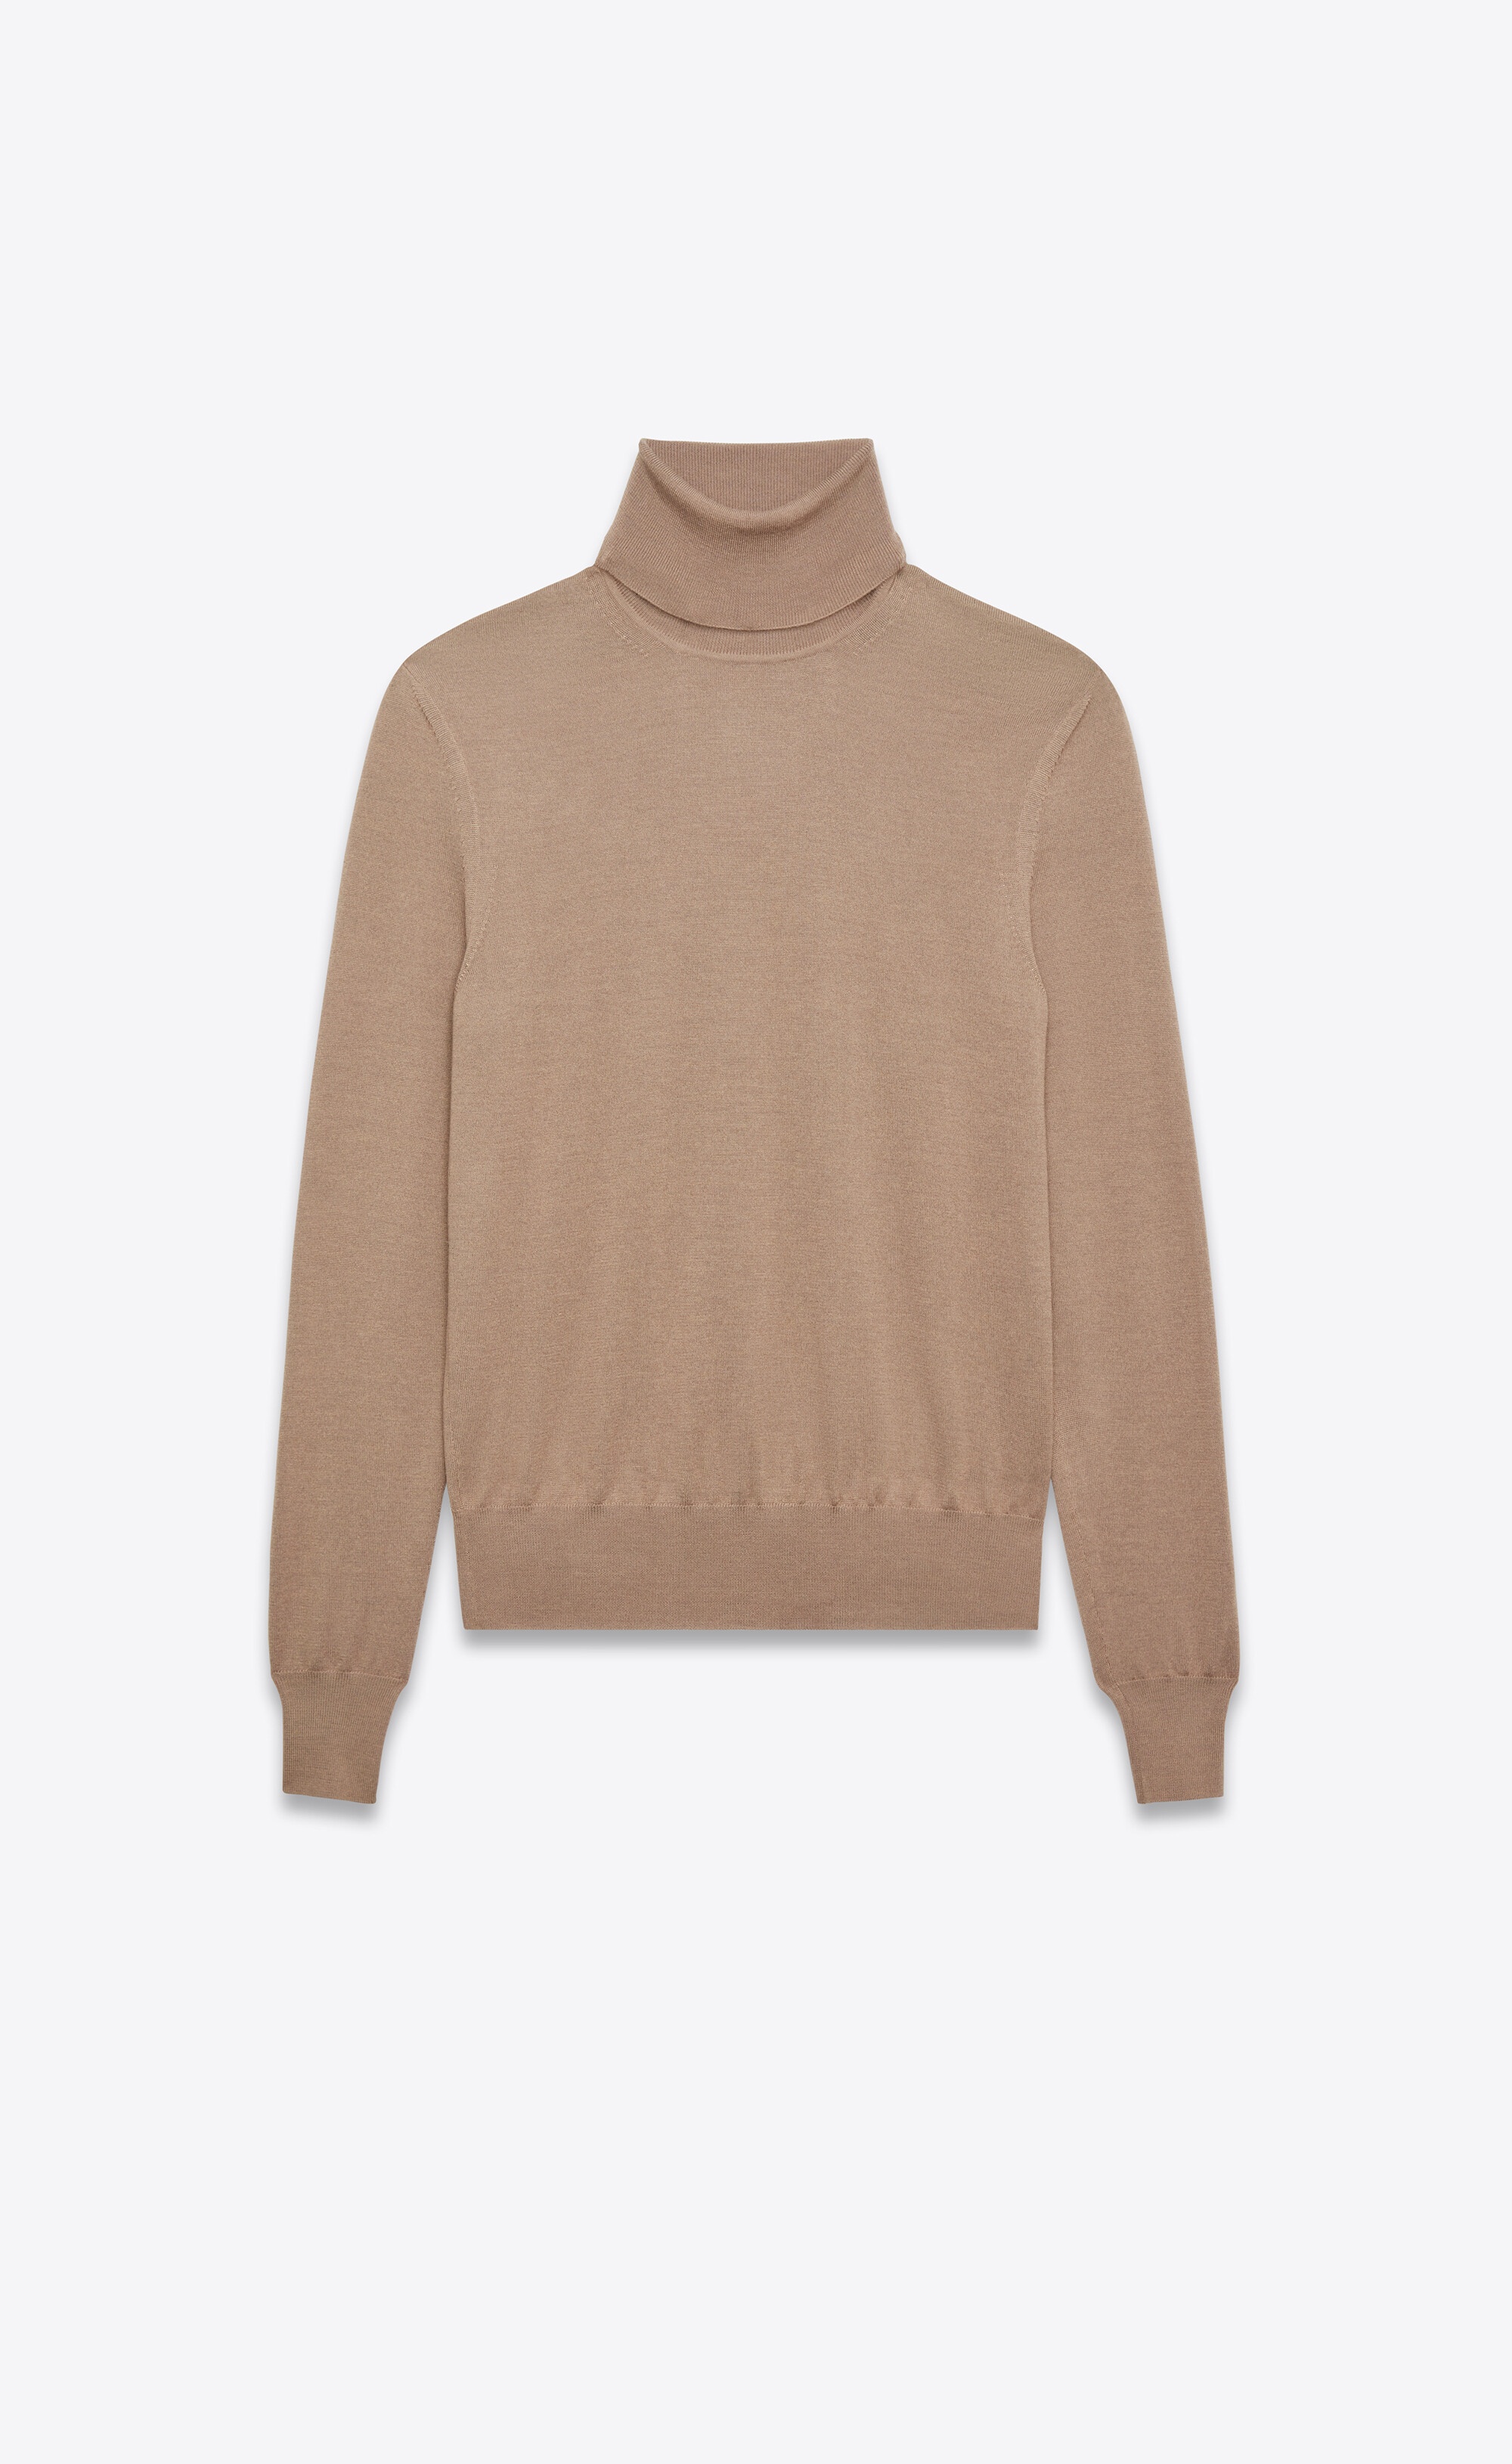 turtleneck sweater in cashmere, wool and silk - 1